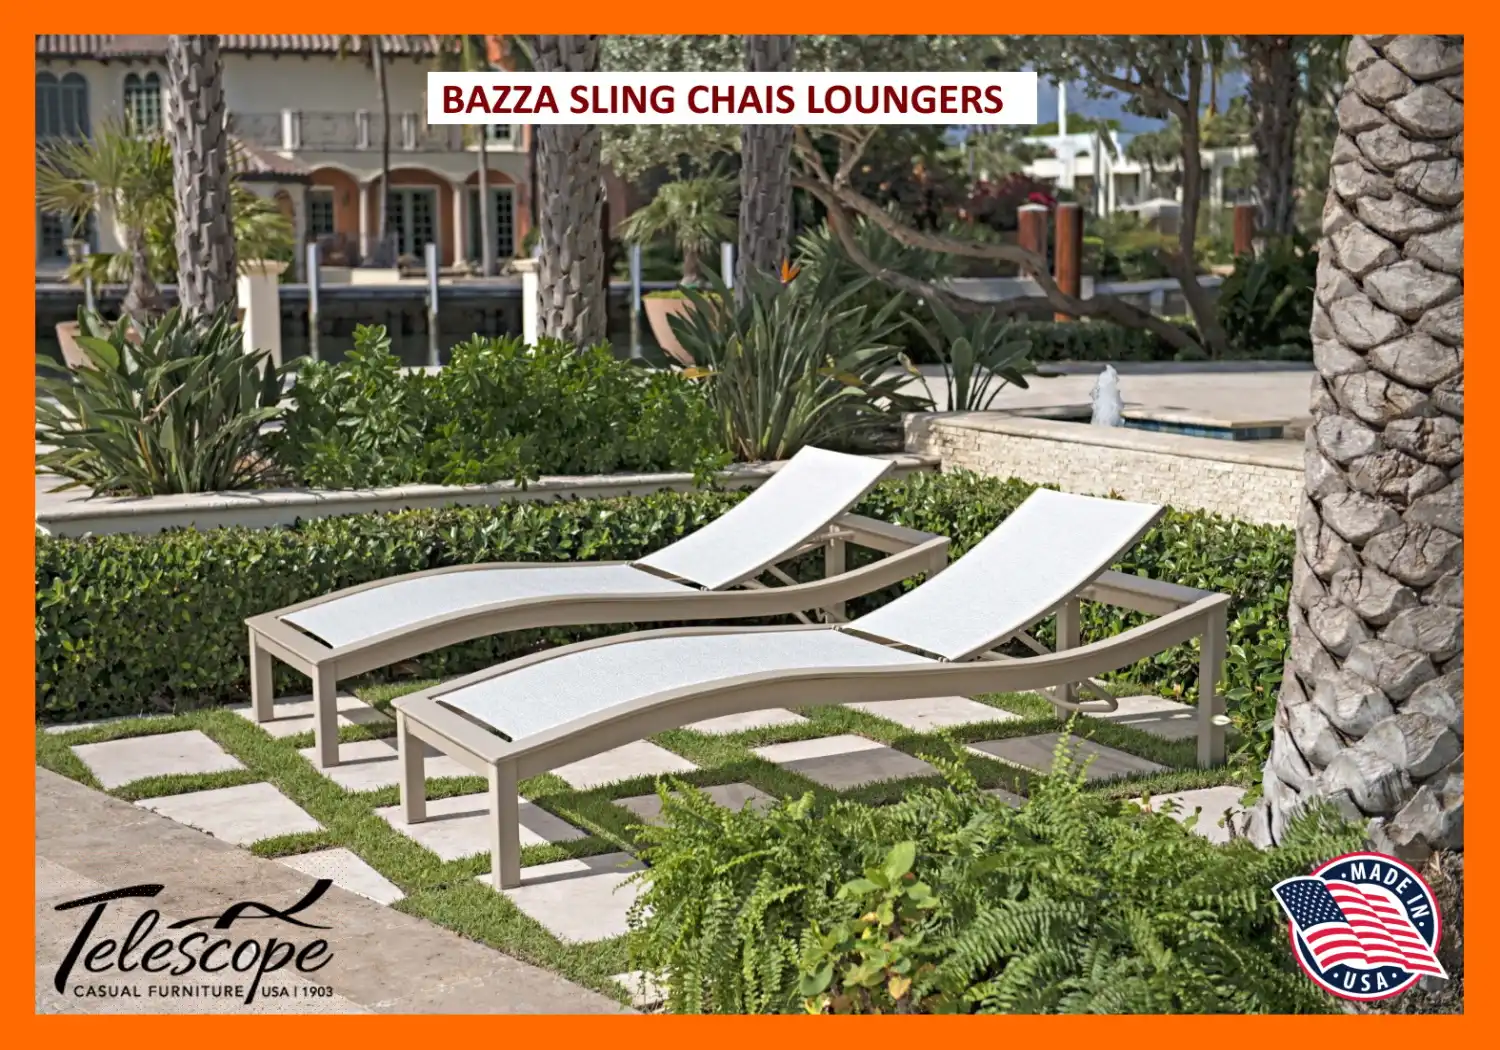 BAZZA SLING CHAIS LOUNGERS